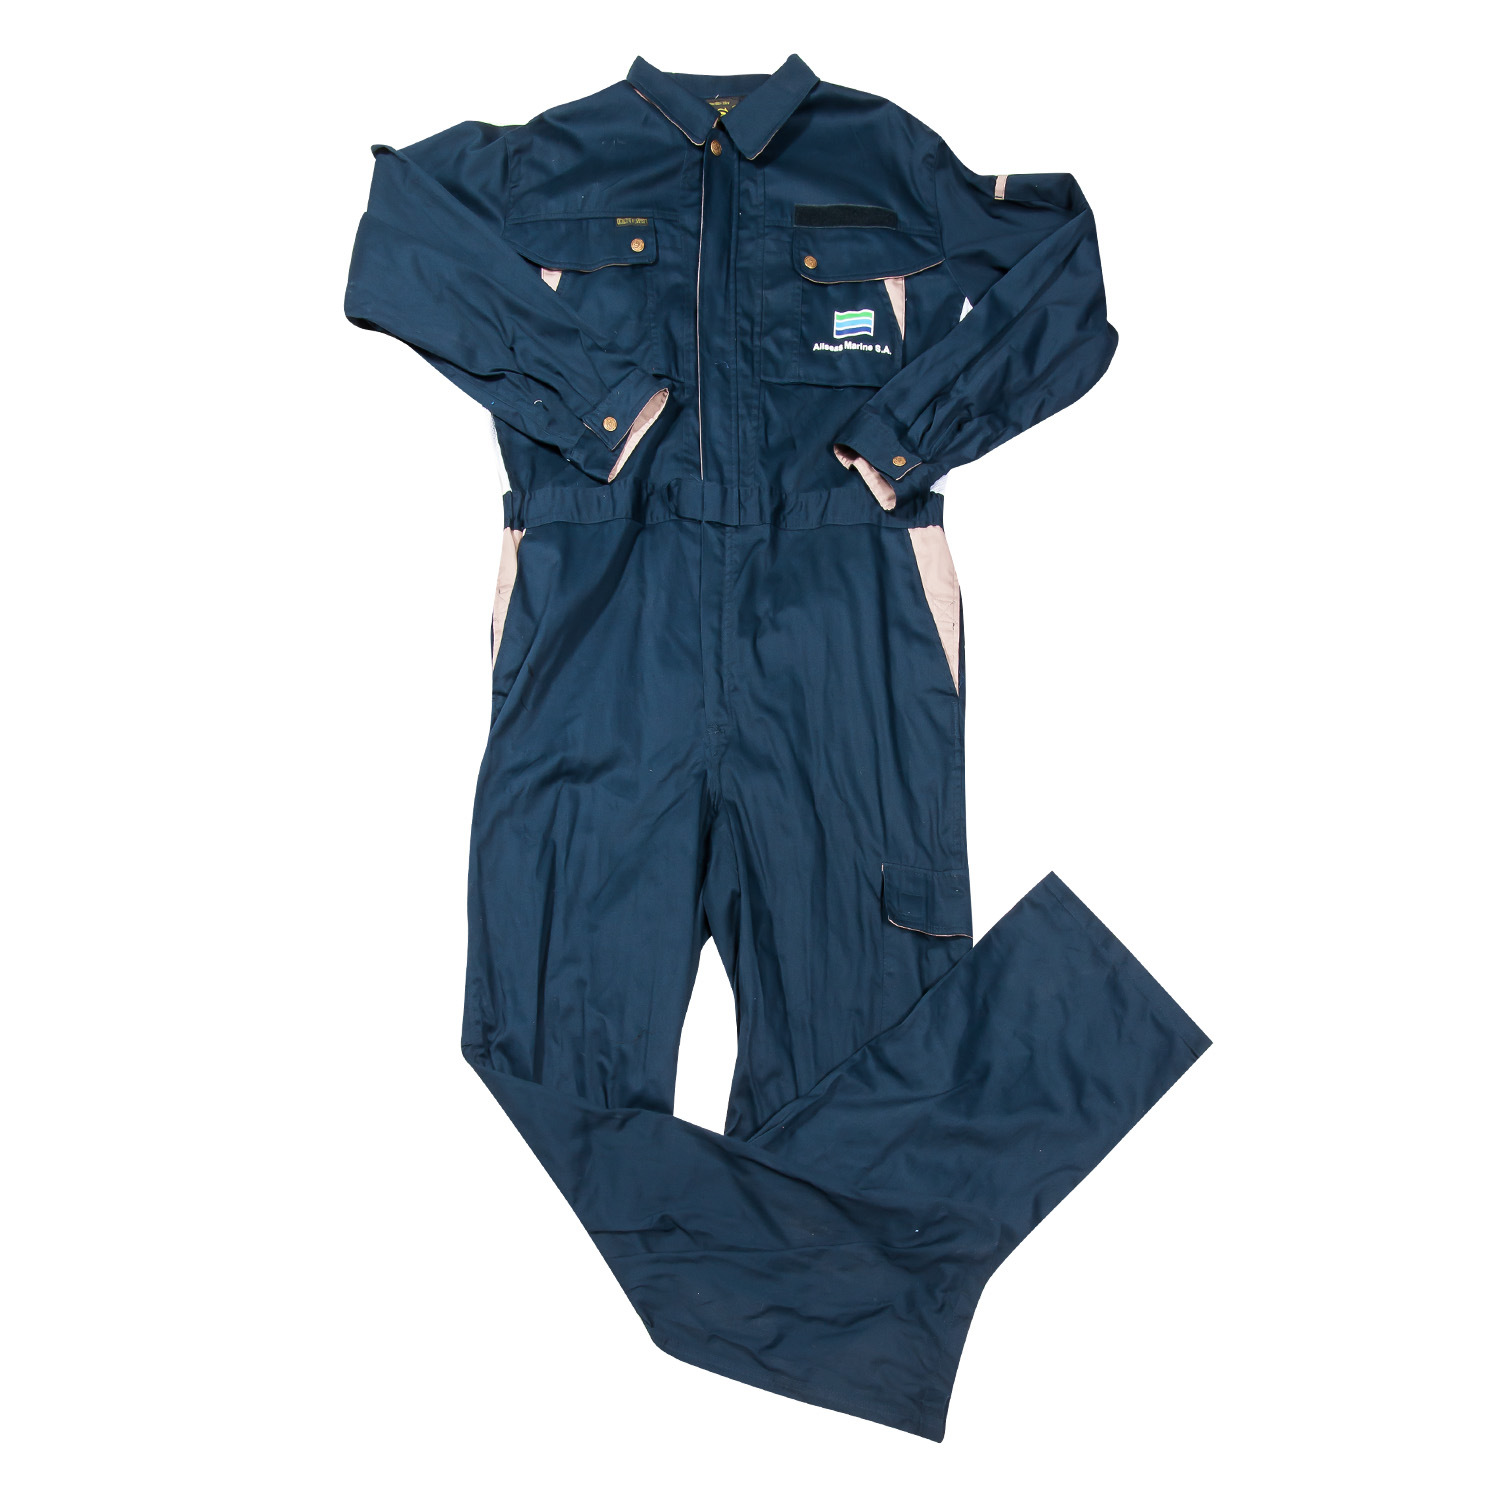 Overall Workwear Uniform with Customers Request